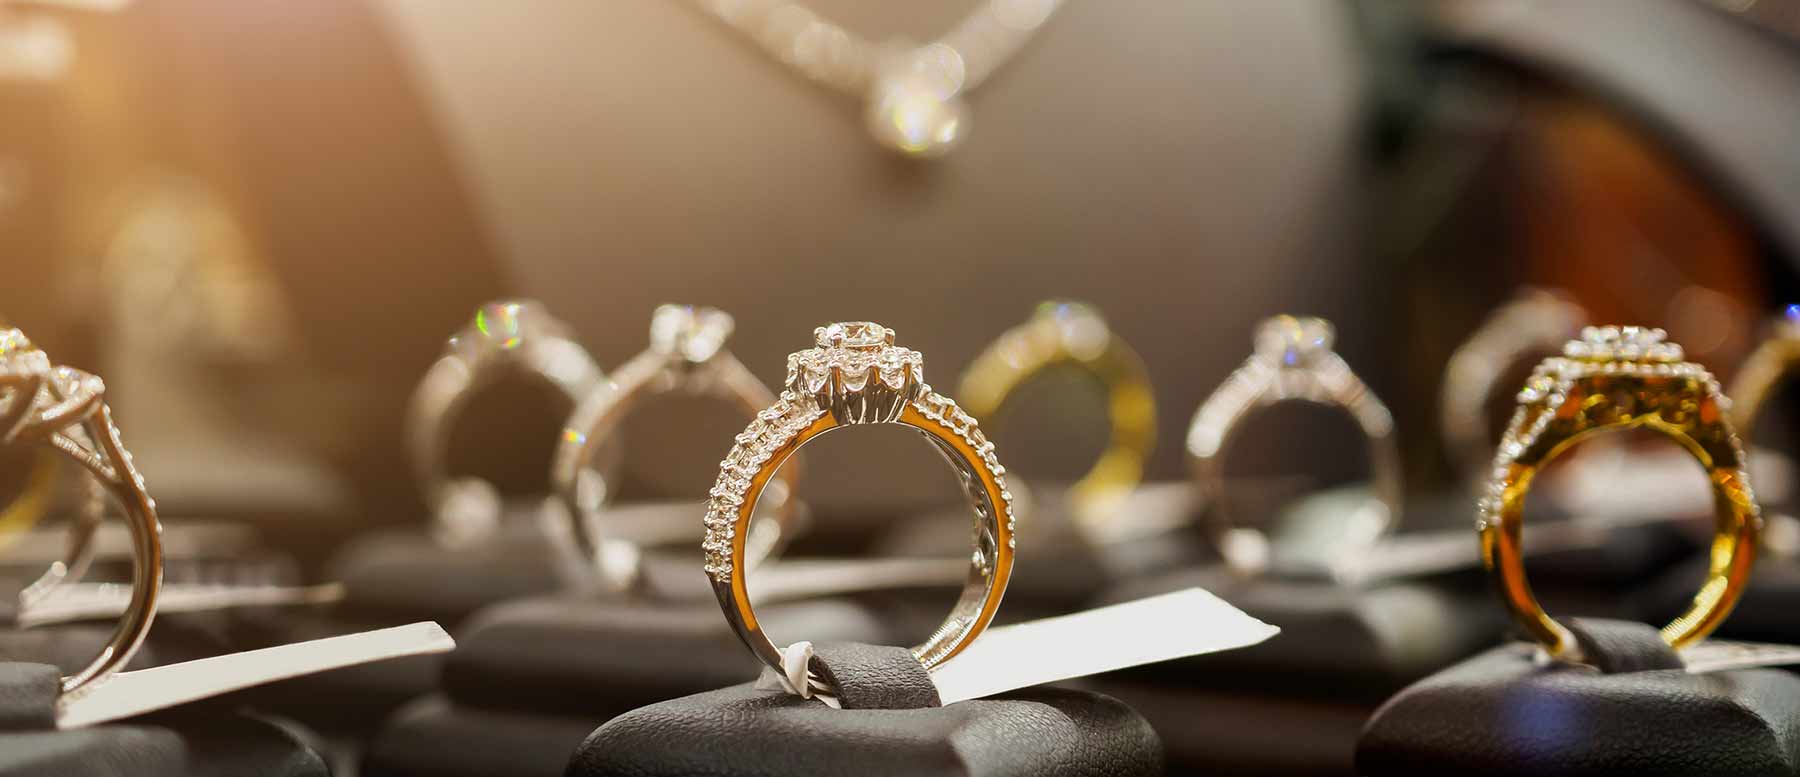 Ranking and cost of the most expensive rings in the world